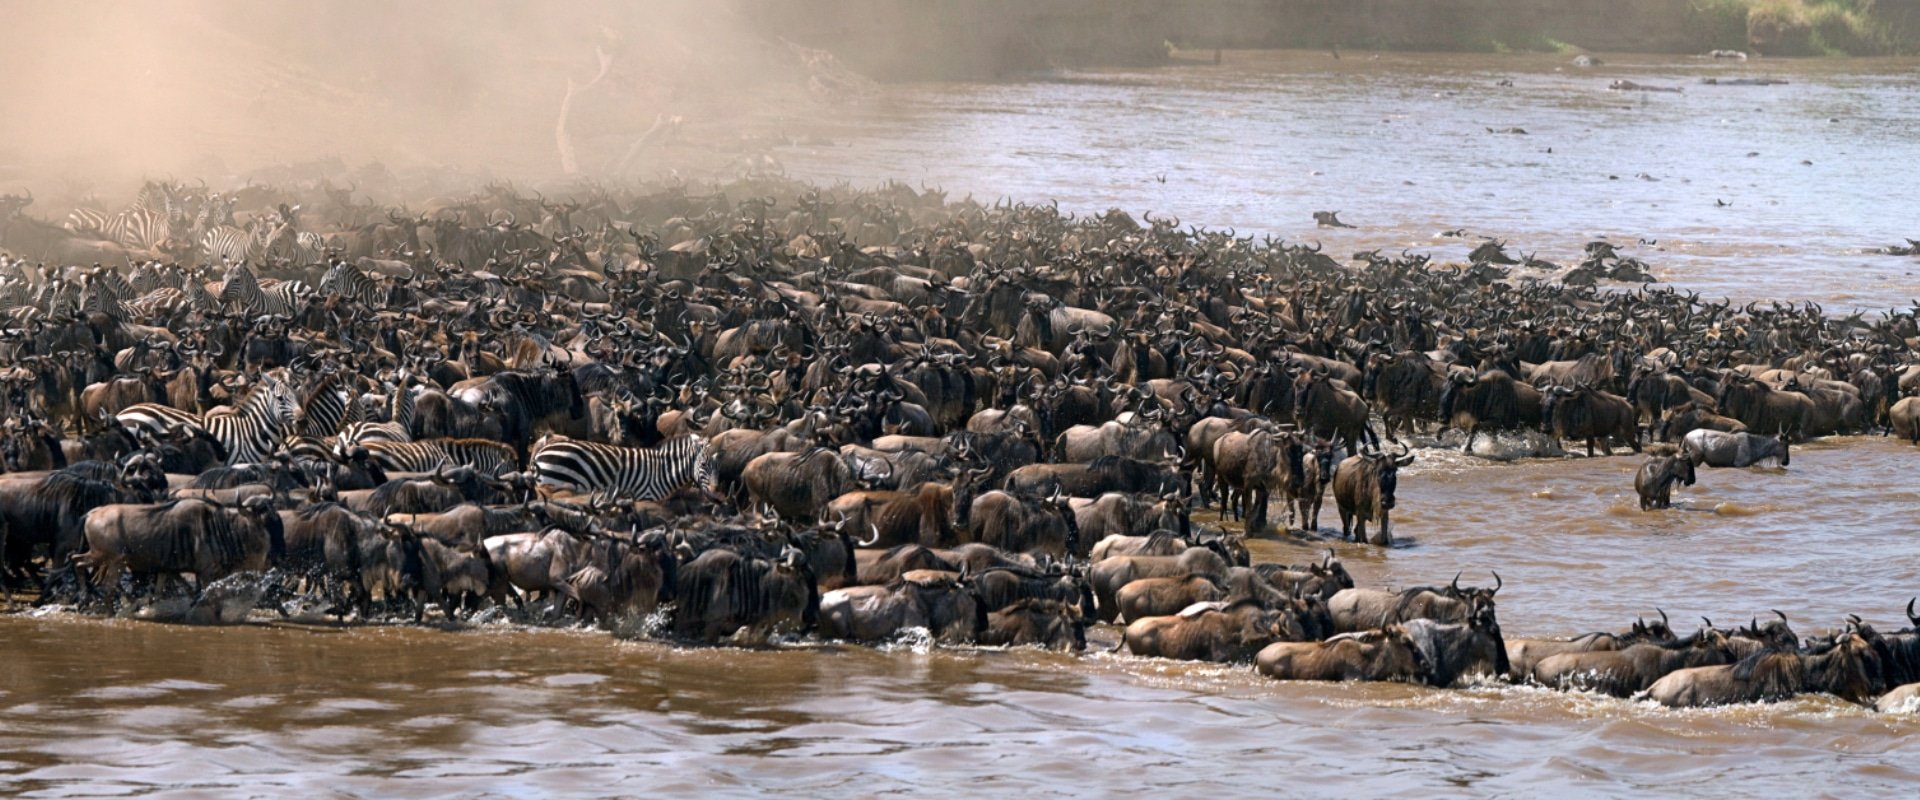 The Great Migration 2